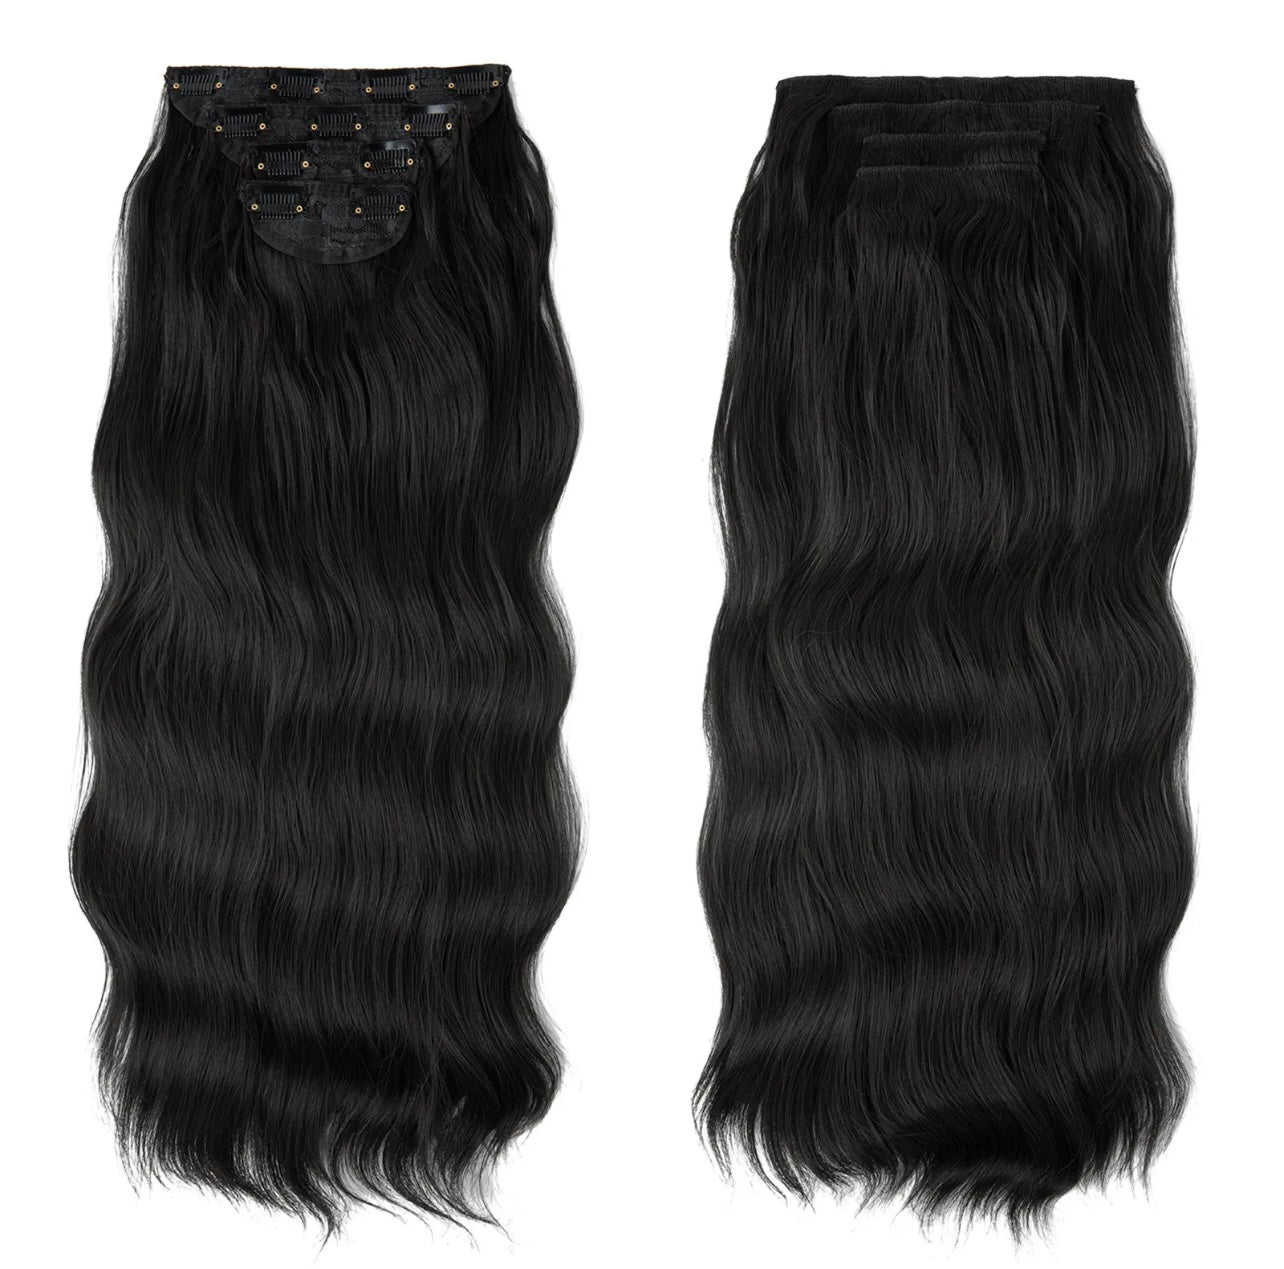 1B - SUPER THICK 22” 4 PIECE WAIST Length WAVE CLIPS IN HAIR Extensions